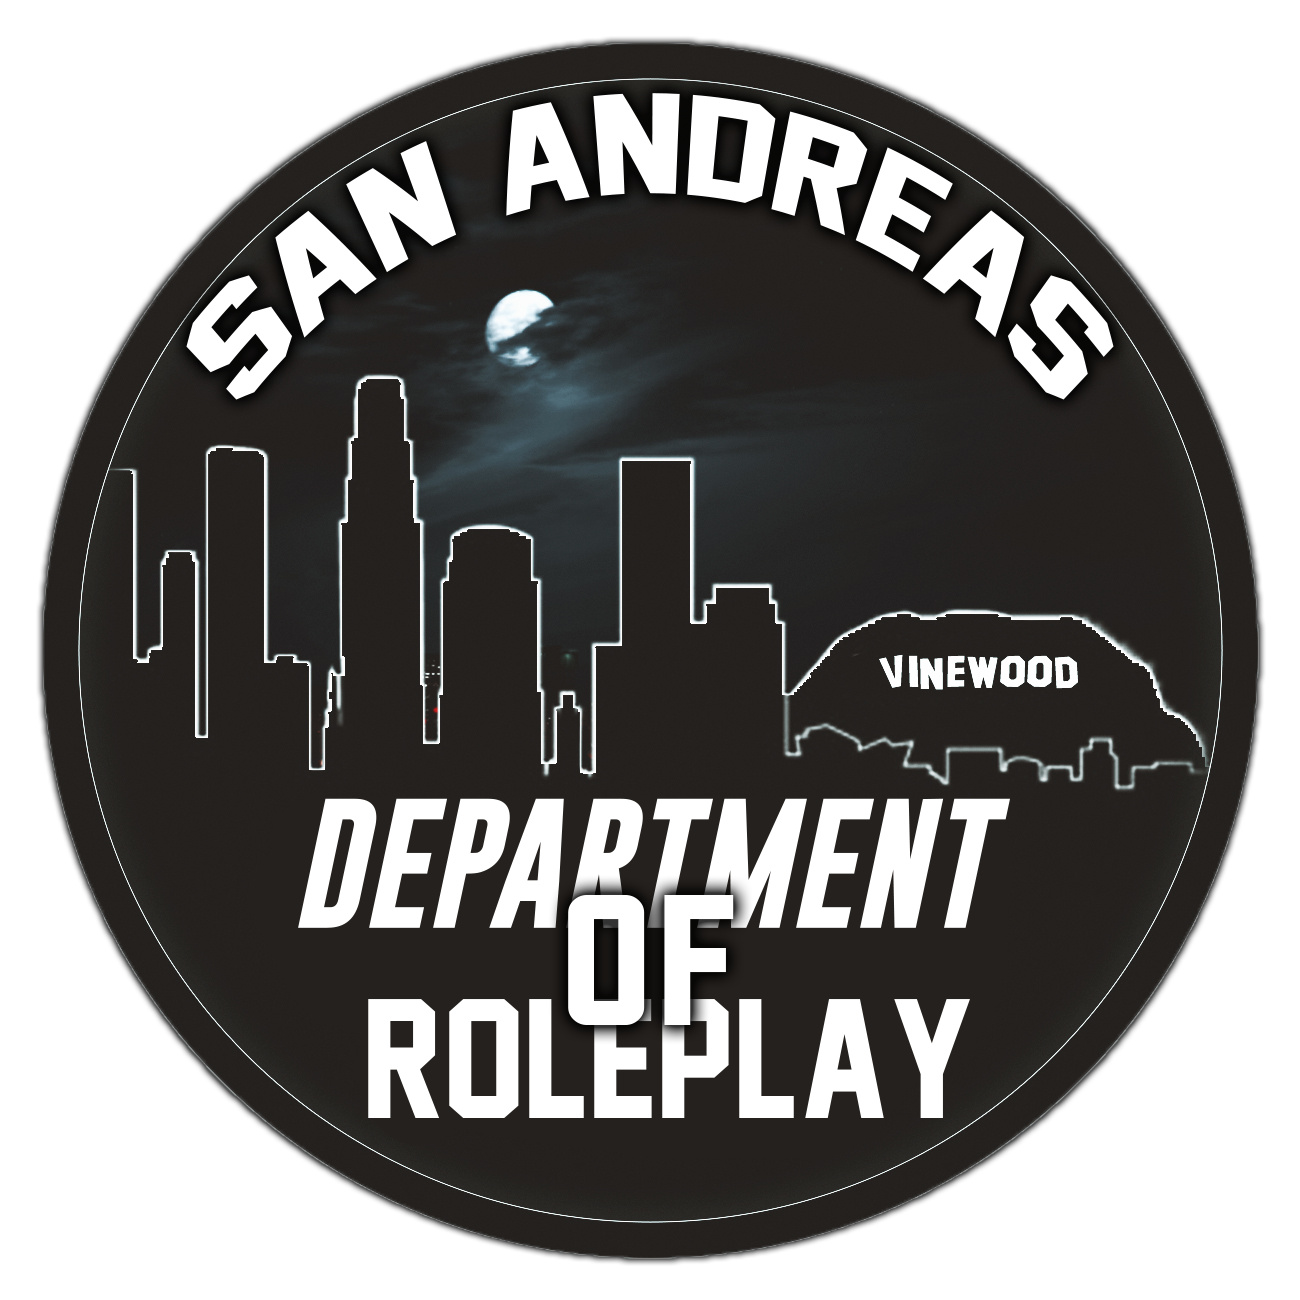 Los Santos Underground Roleplay - True RP - Public Police - Ingame CAD -  Public use addon cars - Looking for staff - Server Bazaar - Cfx.re Community